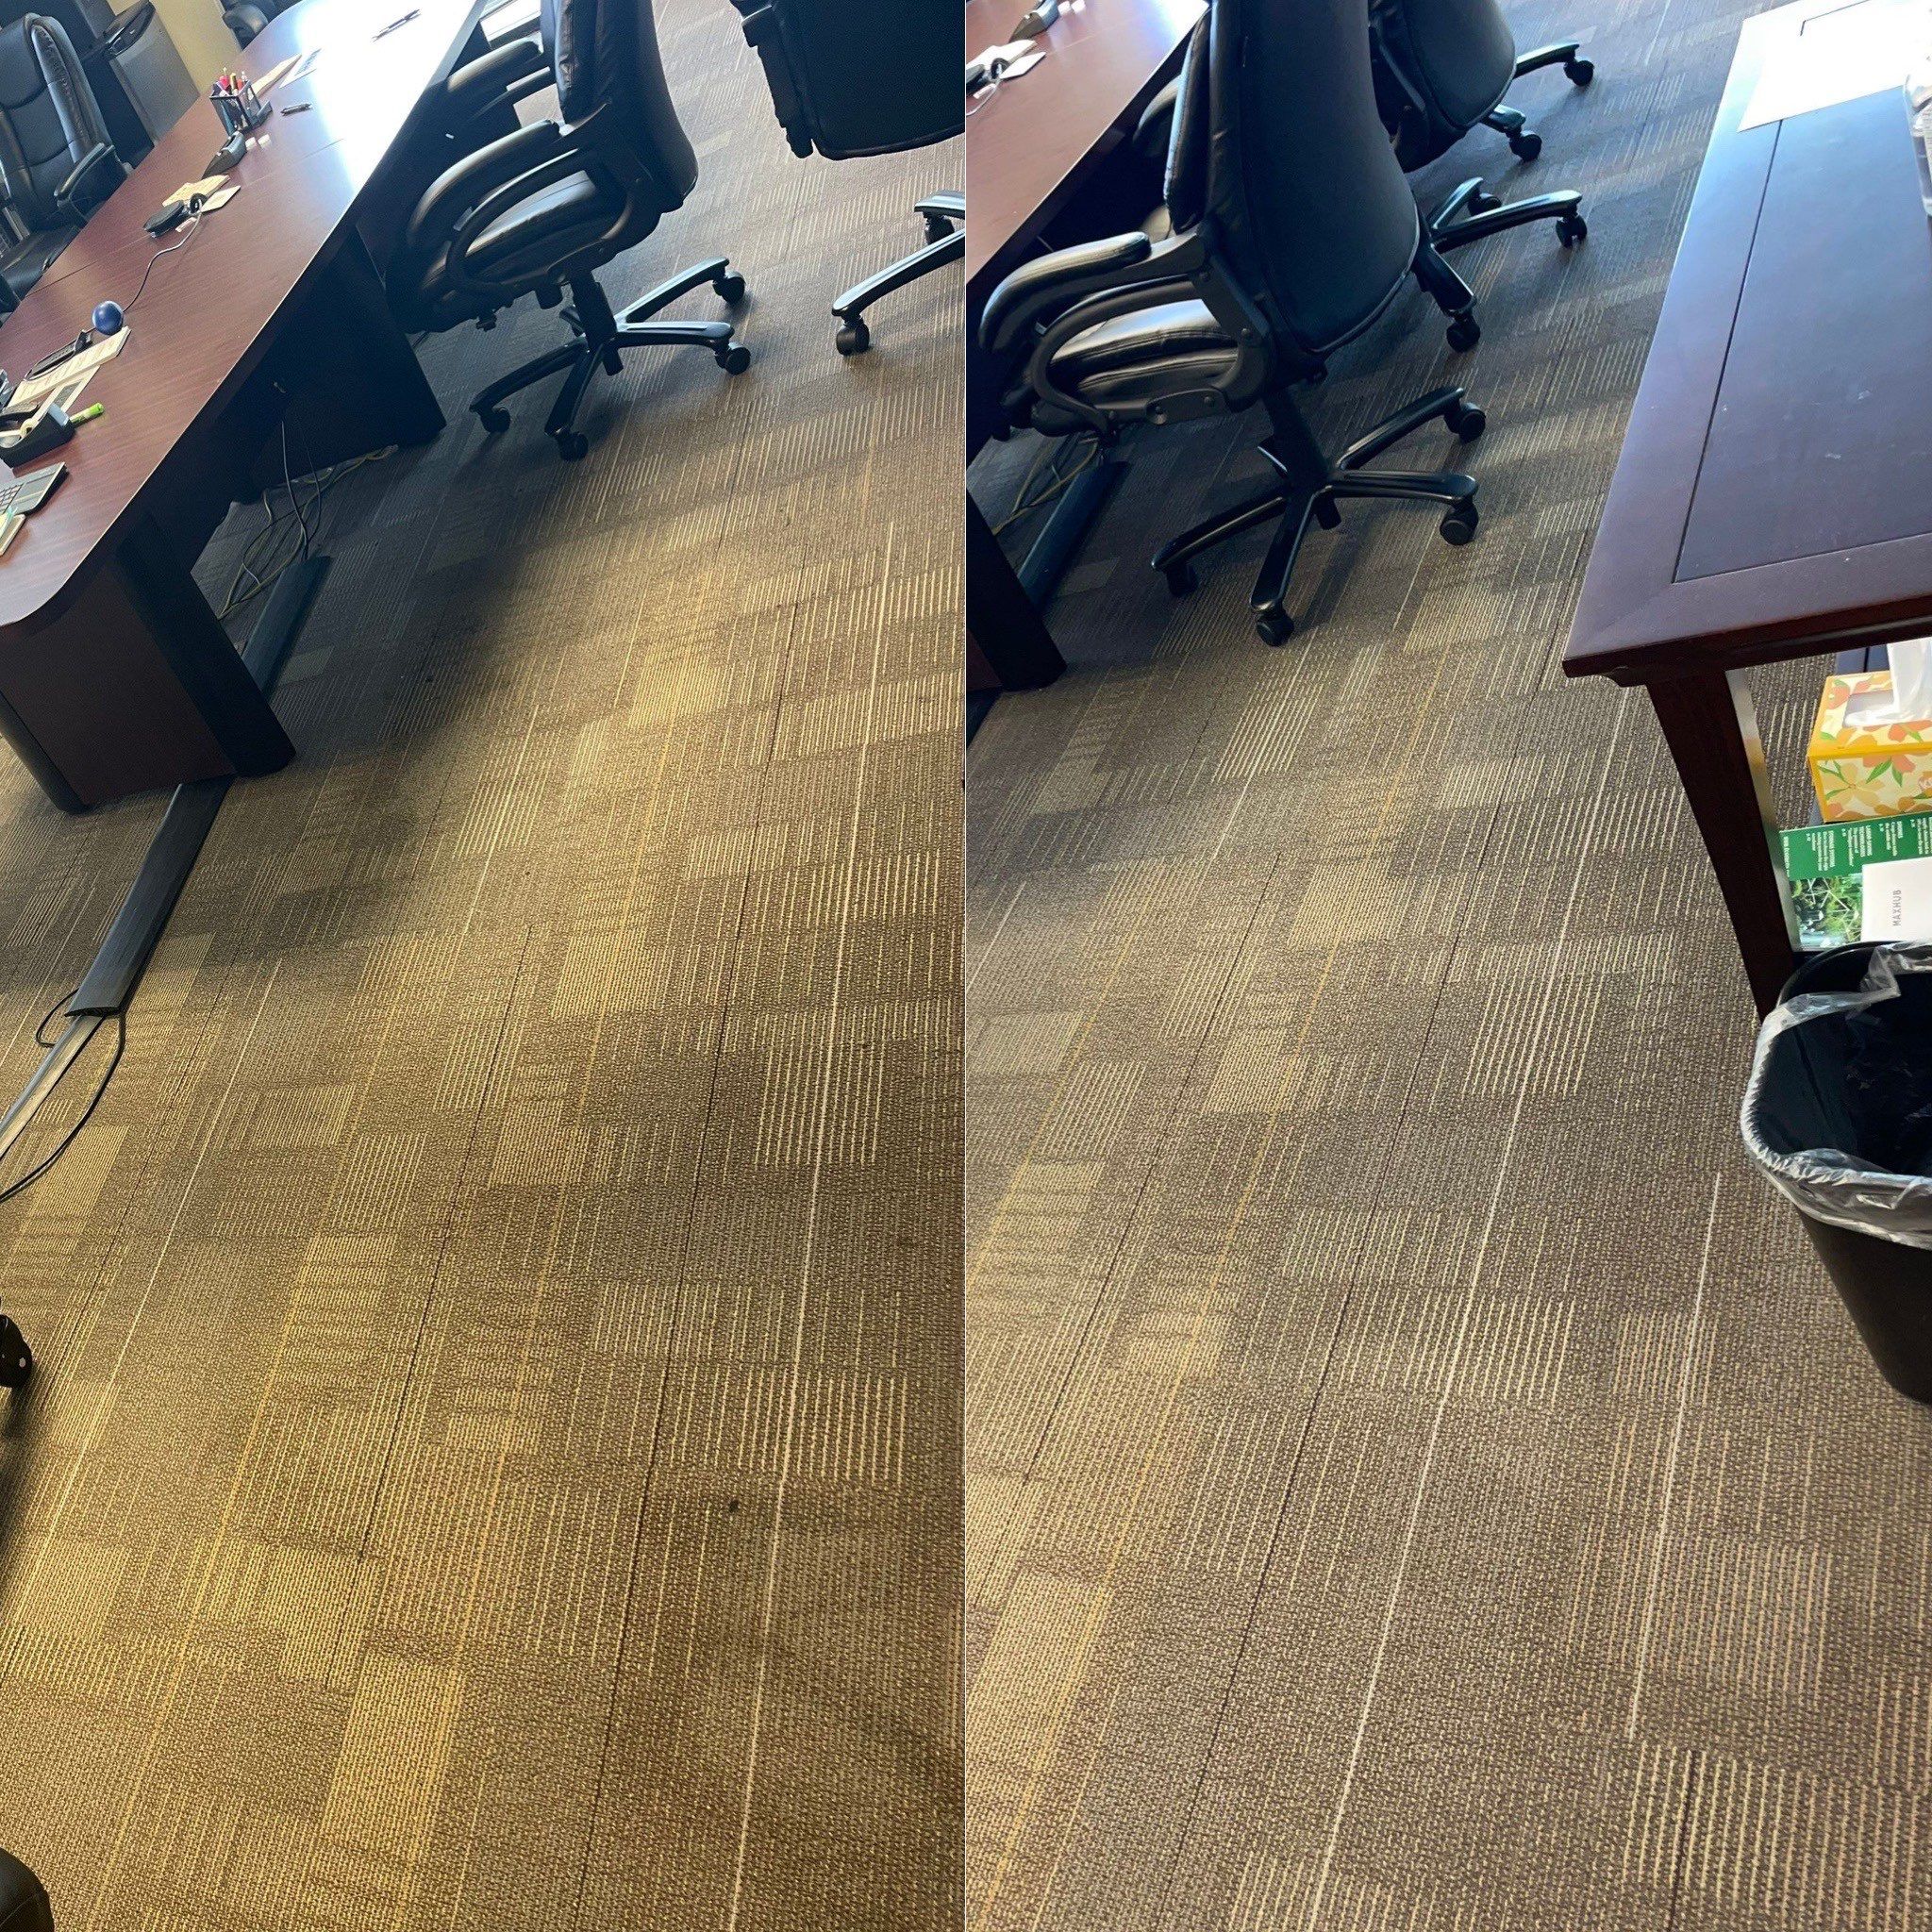 office carpet being cleaned by carpet cleaning company the carpet appears much cleaner and brighter after the cleaning